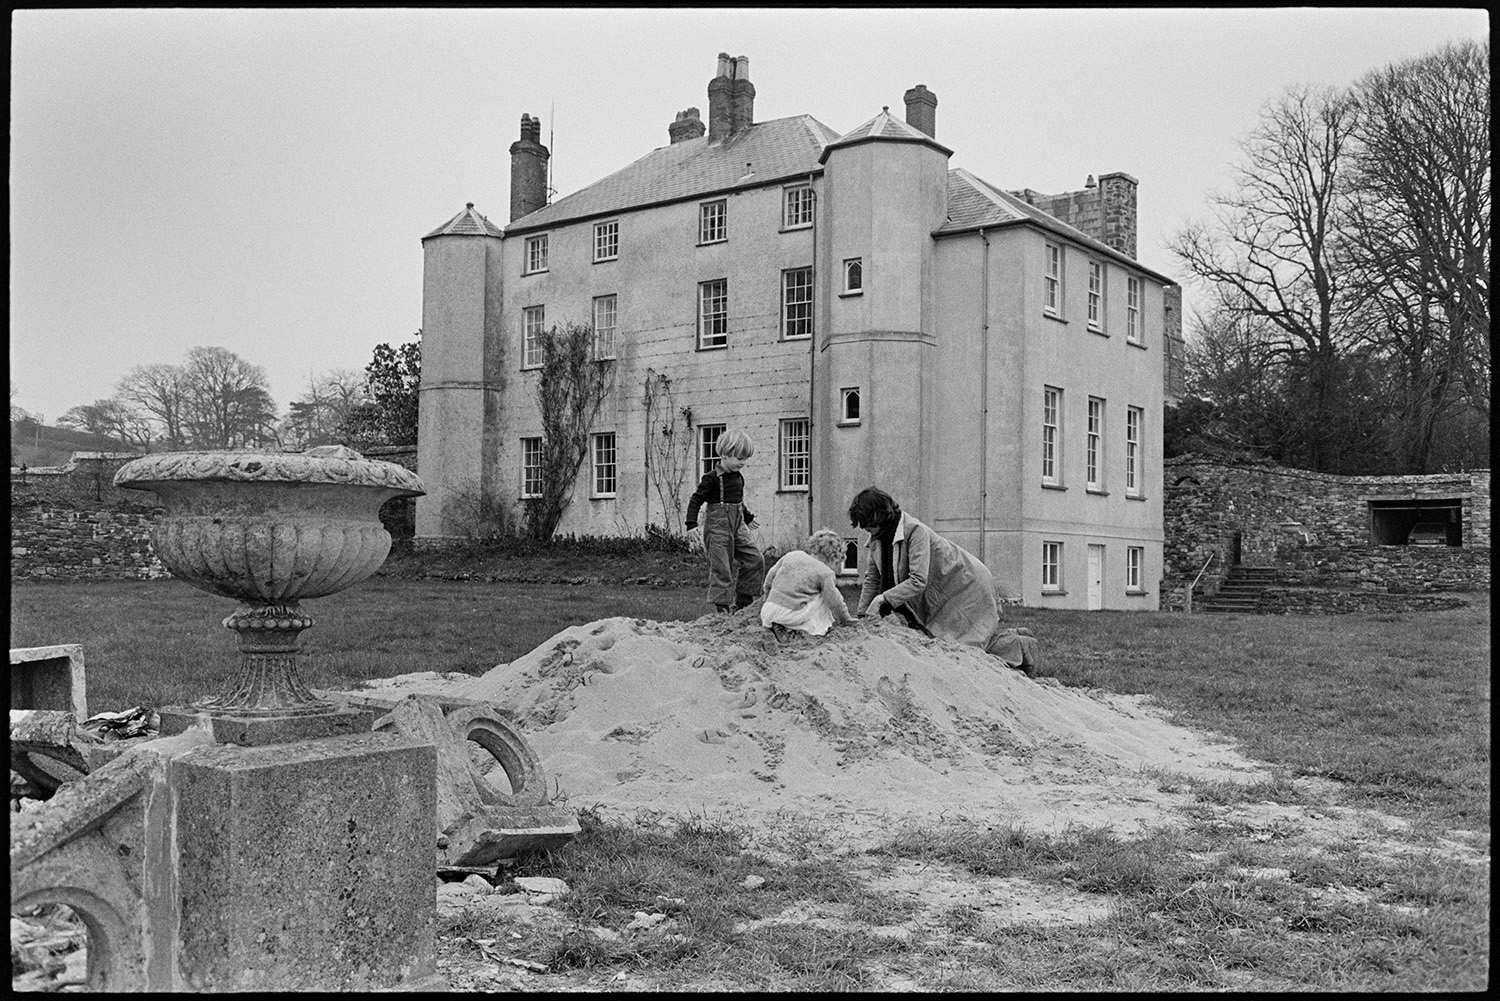 Christening, family tea and walk with children after service view of house, cliff walk.
[A woman and two young children from the Rous family playing in a pile of sand in the garden at Clovelly Court, after a Christening.]